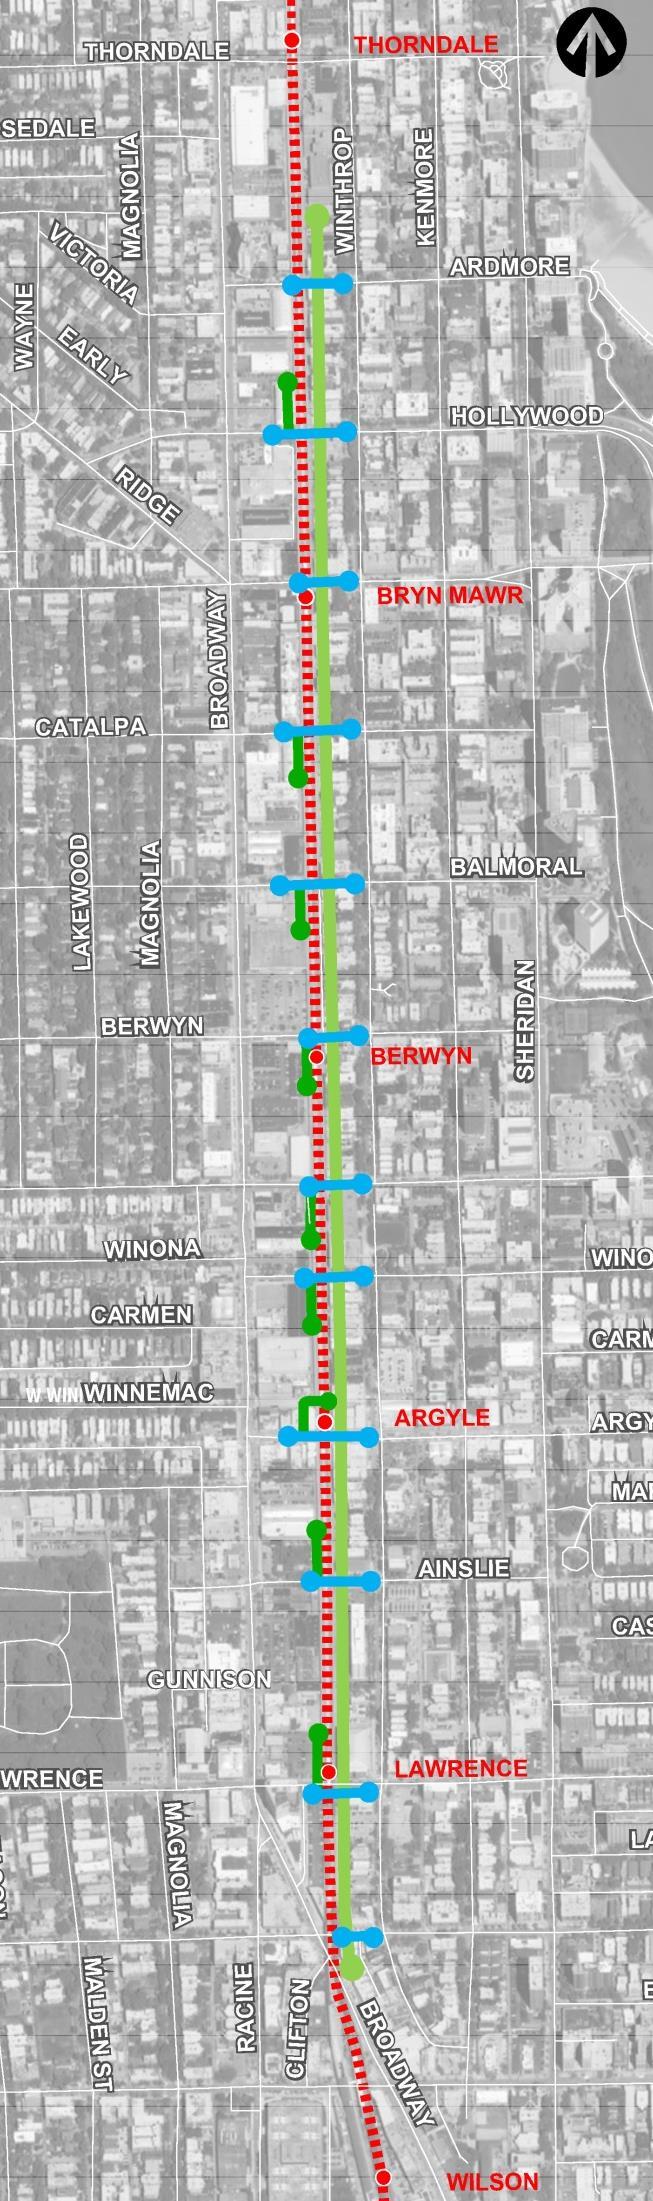 Advance utility relocation overview Starting Spring 2018 East Alley and West Alley trenching to relocate overhead power and communications lines Partial alley closures, noise, vibration, heavy